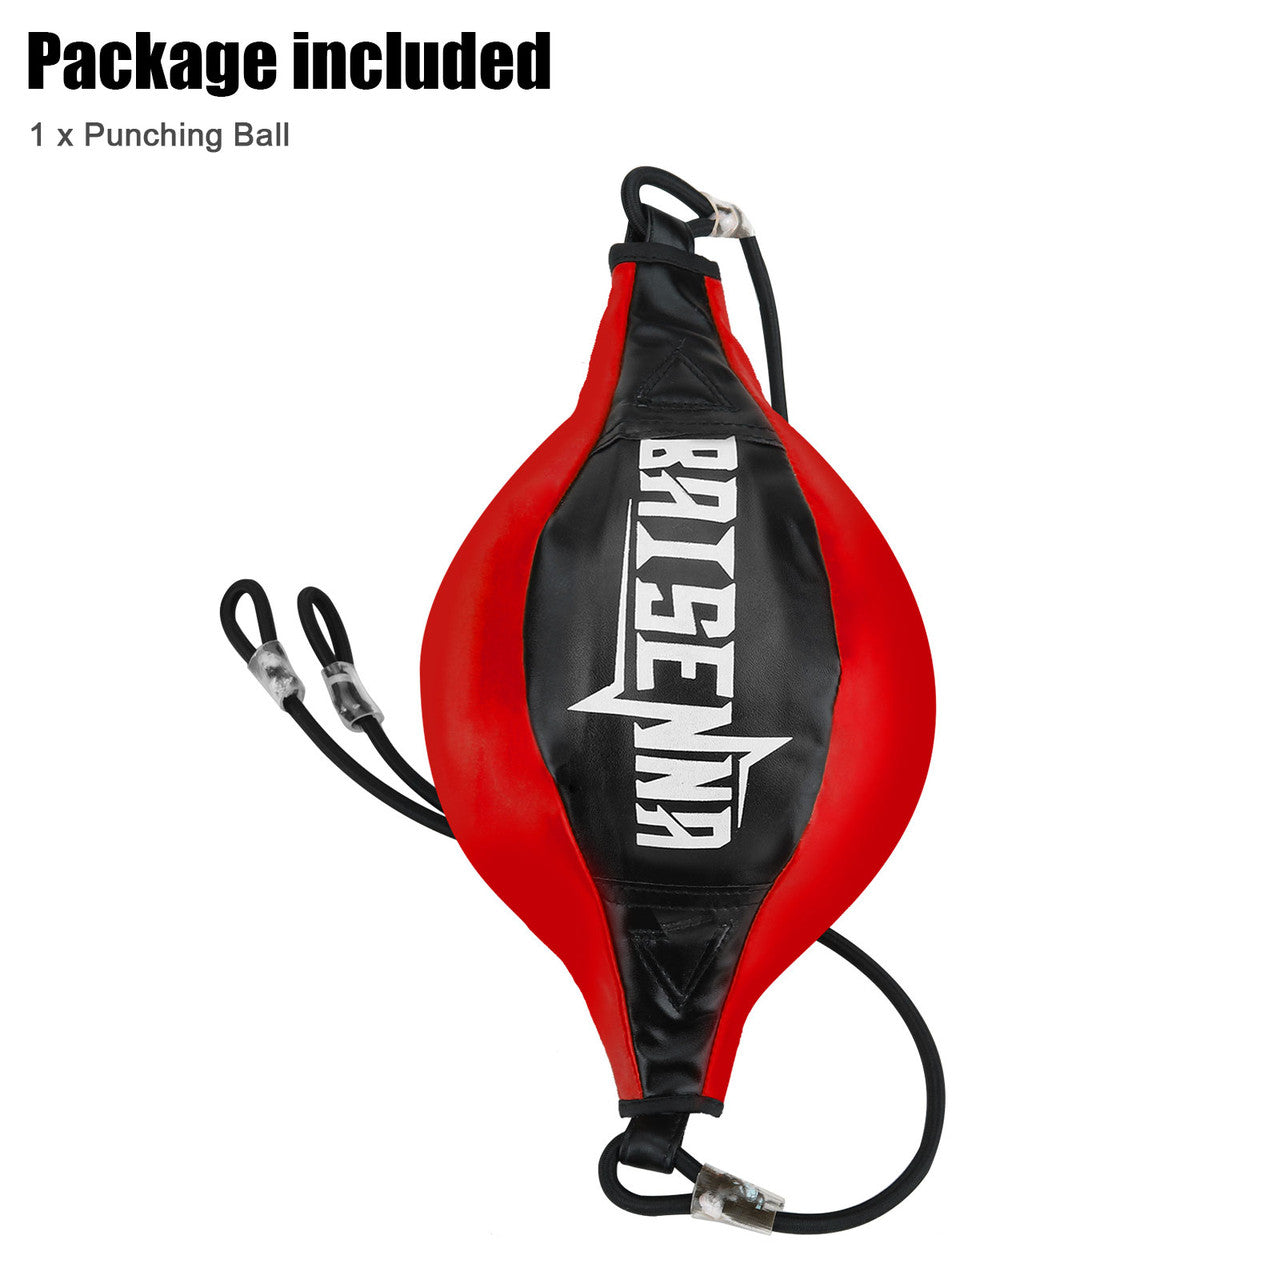 Boxing Speed Ball Leather Boxing Ball Including Rope for Gym MMA Boxing Sports Punch Bag (Black+Red)